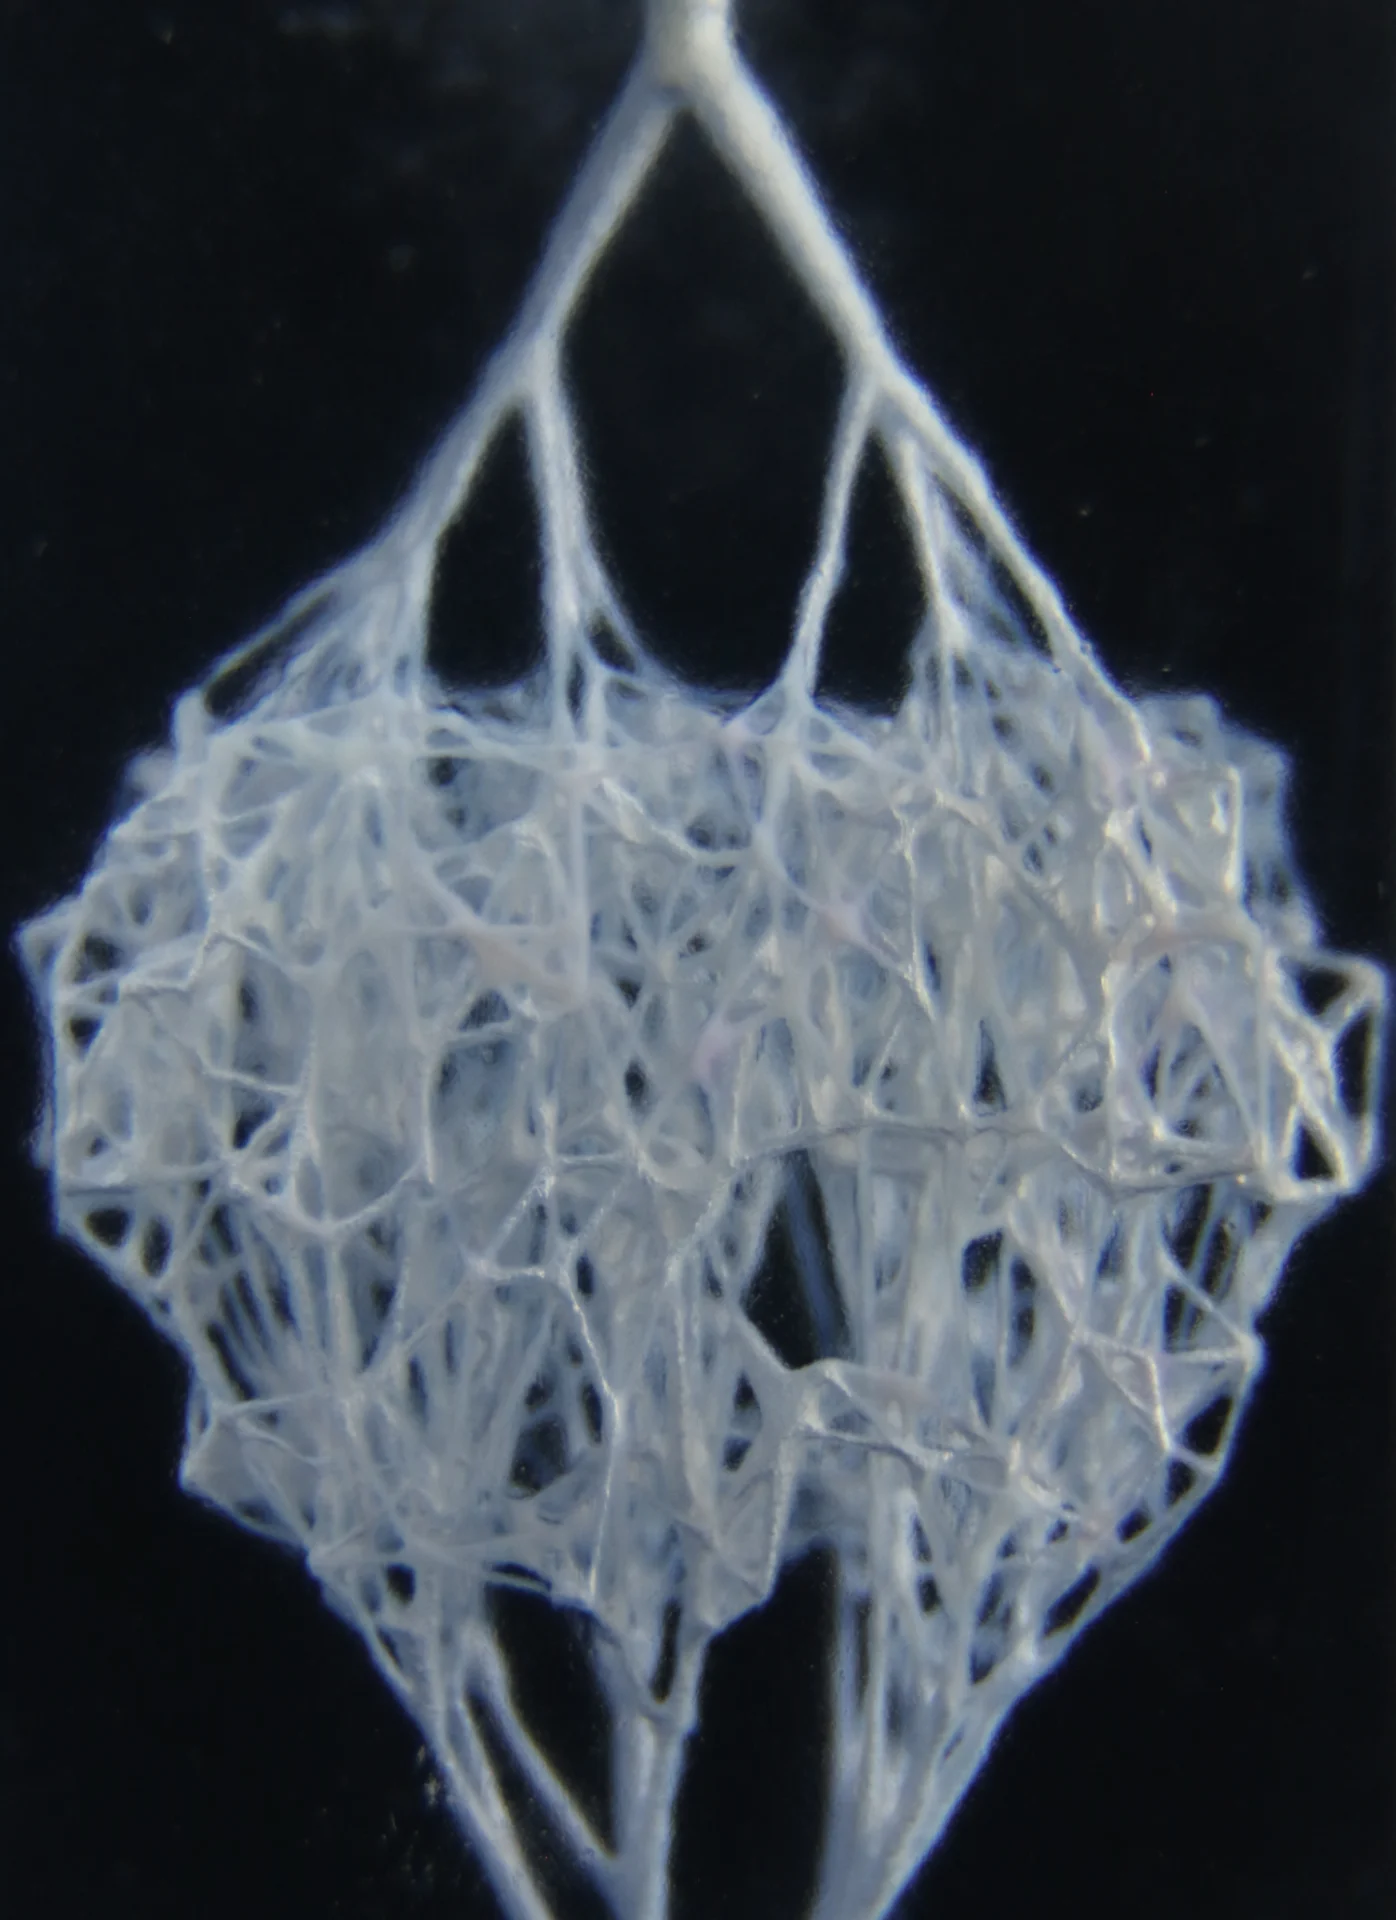 A network of capillaries 3D-printed using a newly developed technique. (Credit: Hayes et al. 2022, Advanced Materials)